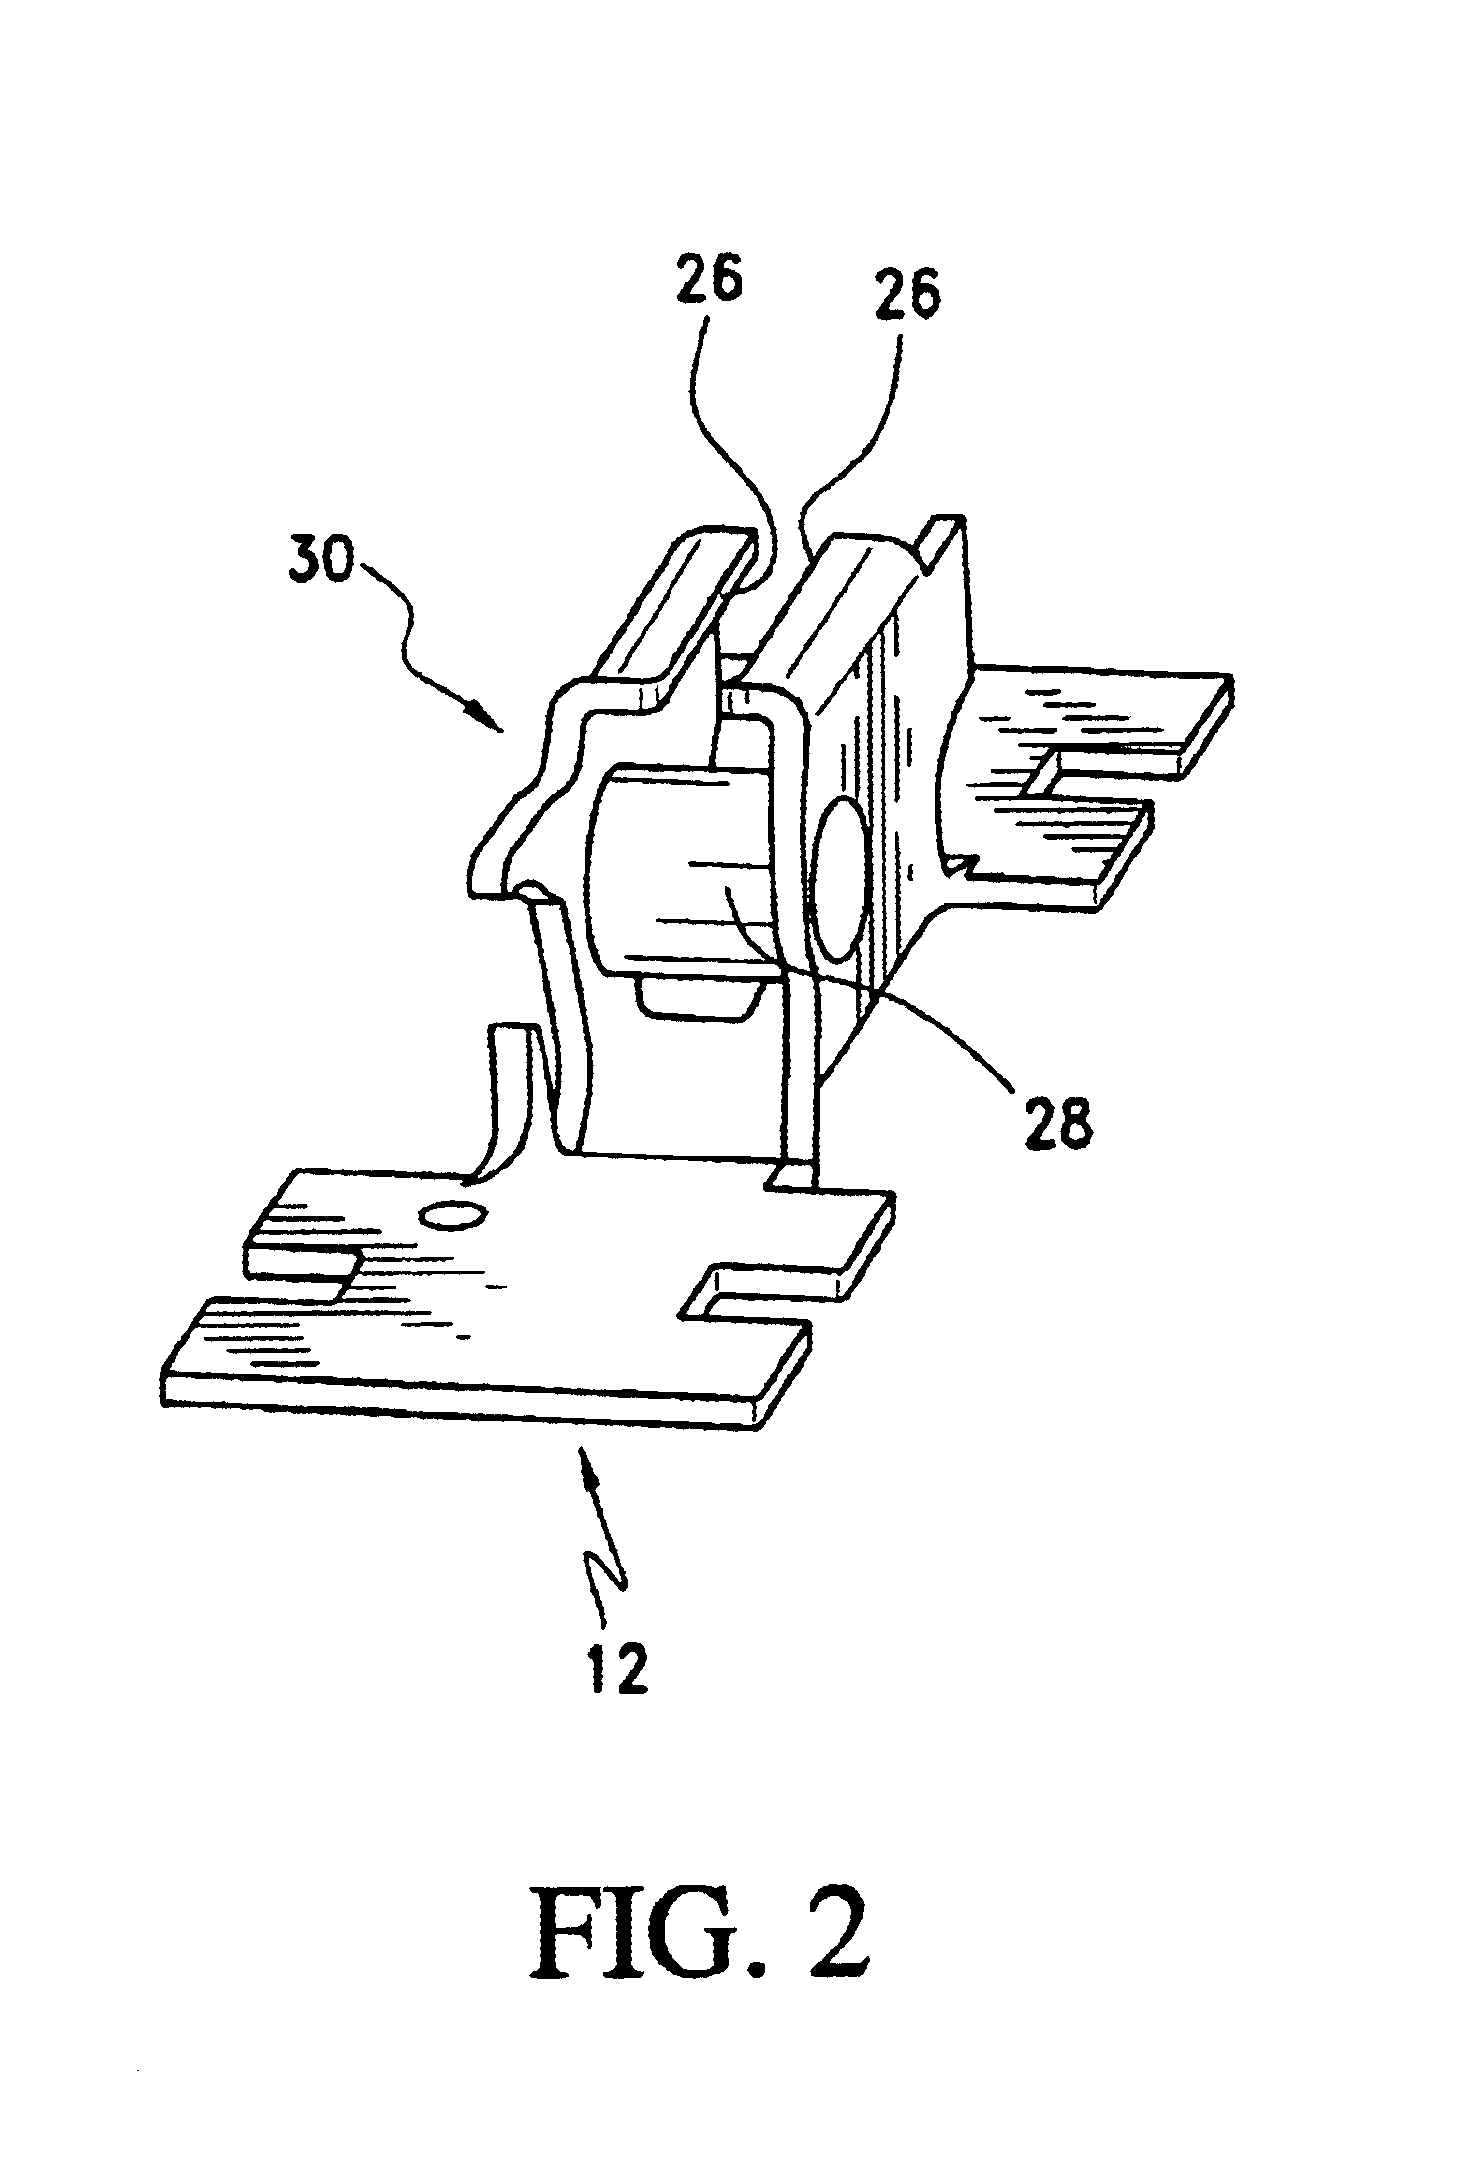 Guide arrangement for a roof element on an opening vehicle roof